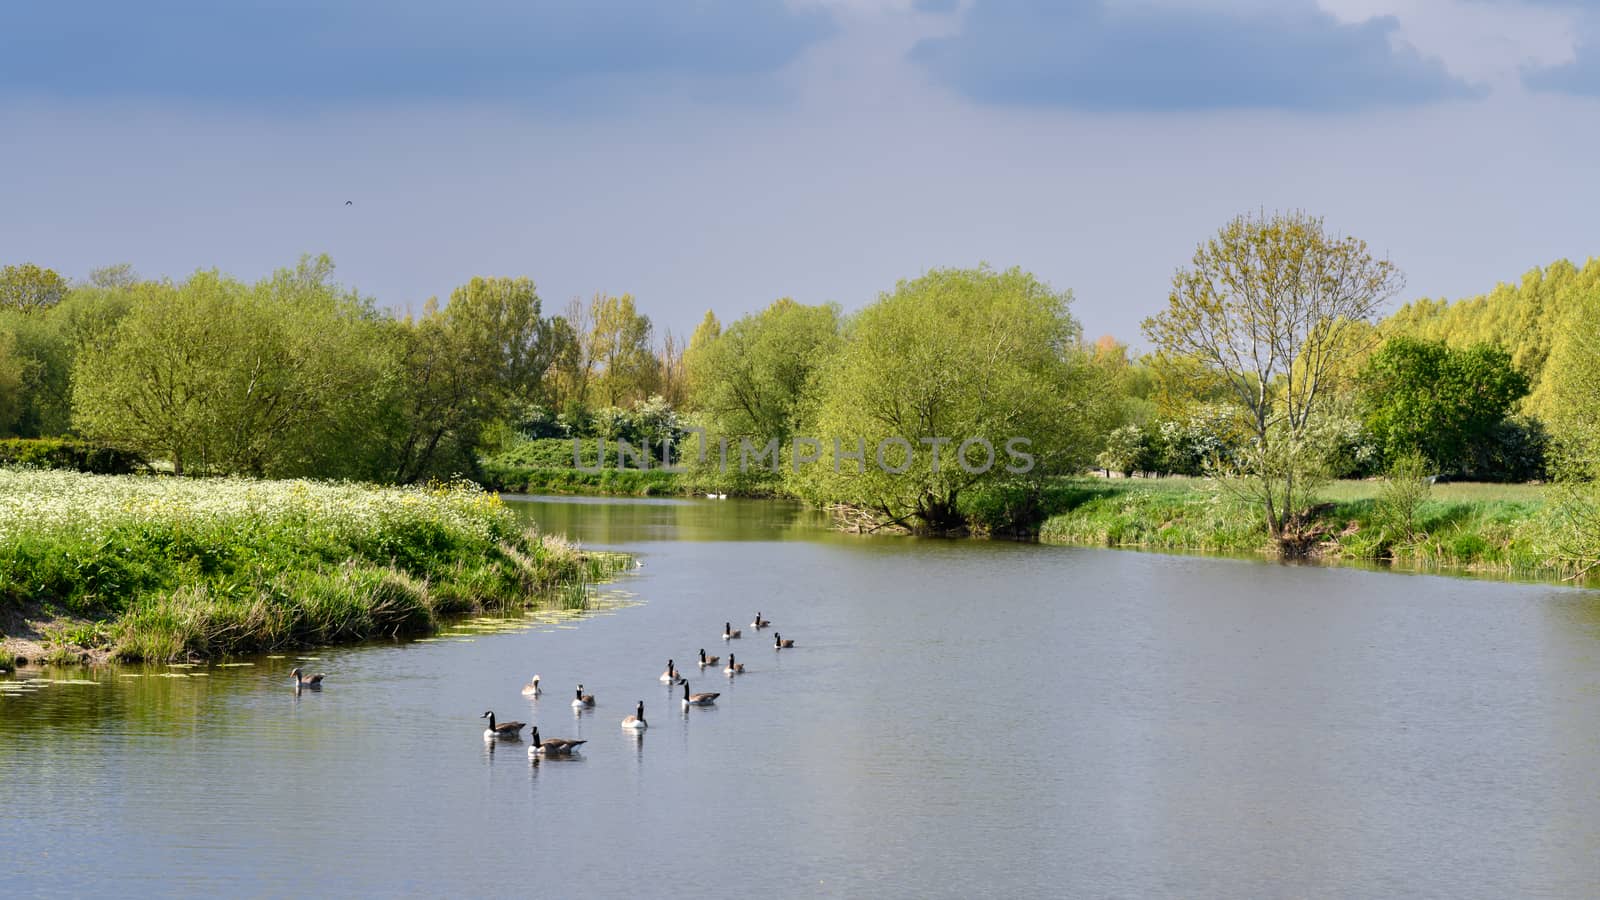 View along the River Avon in Worcestershire